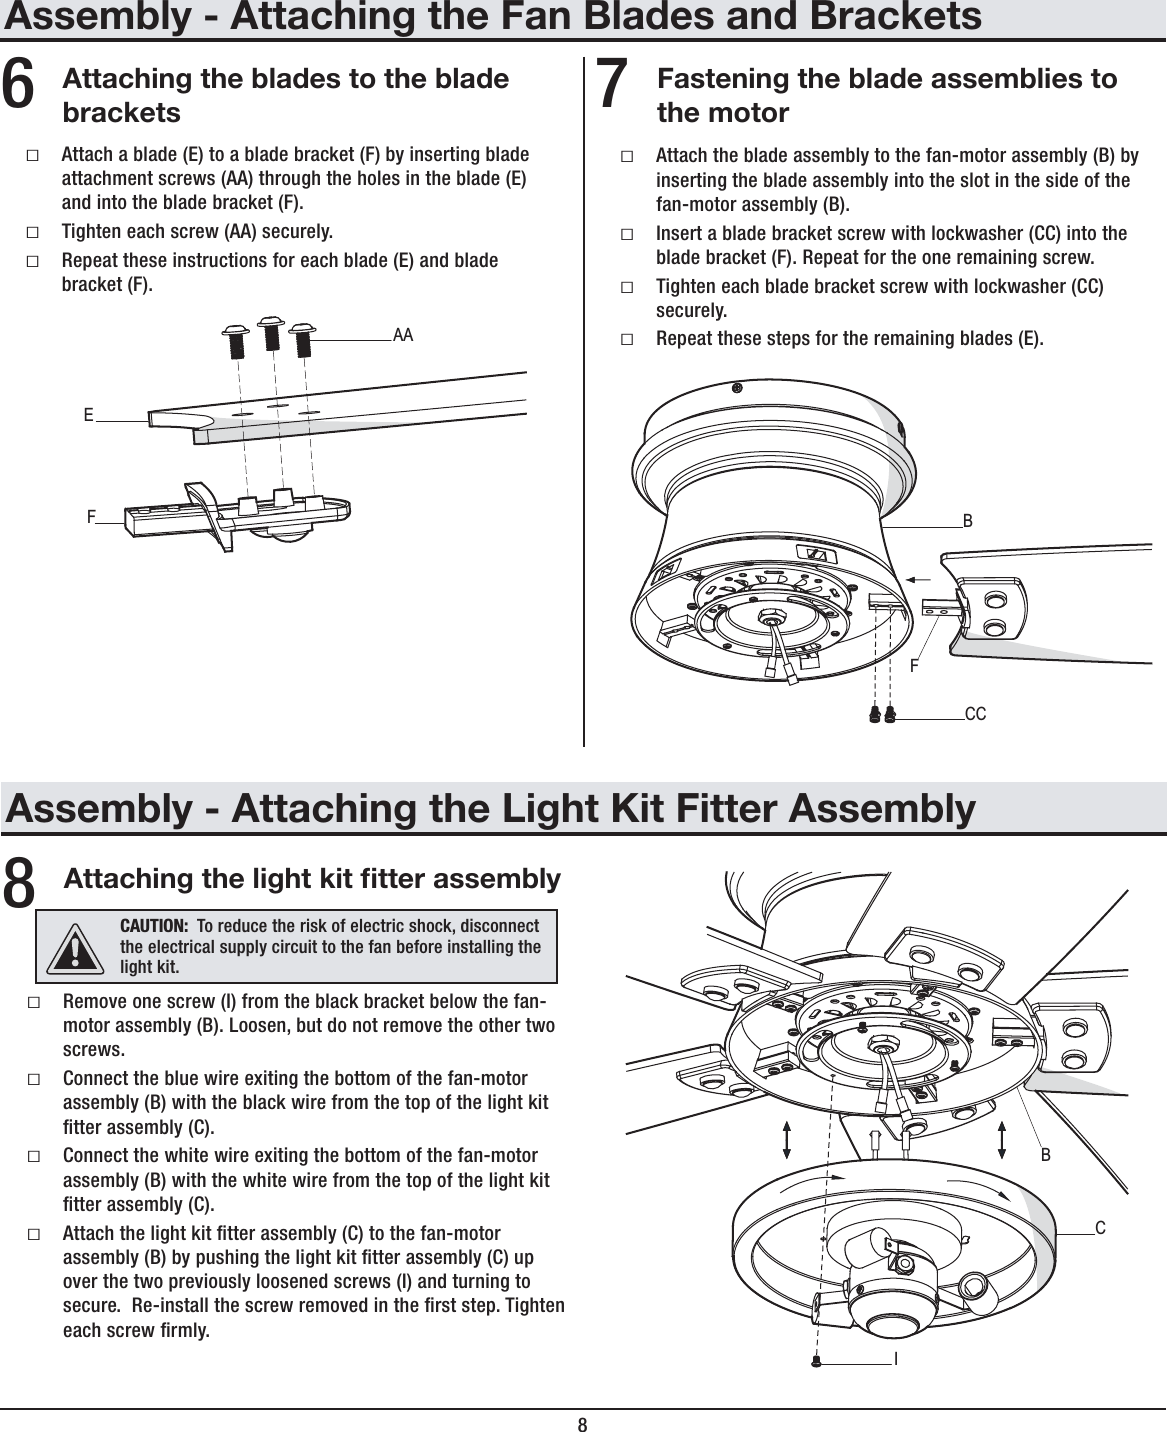 8Assembly - Attaching the Fan Blades and BracketsAttaching the blades to the bladebracketsFastening the blade assemblies tothe motorƑAttach a blade (E) to a blade bracket (F) by inserting blade attachment screws (AA) through the holes in the blade (E) and into the blade bracket (F). ƑTighten each screw (AA) securely.ƑRepeat these instructions for each blade (E) and blade bracket (F).ƑAttach the blade assembly to the fan-motor assembly (B) by inserting the blade assembly into the slot in the side of the fan-motor assembly (B).ƑInsert a blade bracket screw with lockwasher (CC) into the blade bracket (F). Repeat for the one remaining screw.ƑTighten each blade bracket screw with lockwasher (CC) securely.ƑRepeat these steps for the remaining blades (E).67CCBFFEAAAssembly - Attaching the Light Kit Fitter AssemblyAttaching the light kit tter assemblyƑRemove one screw (I) from the black bracket below the fan-motor assembly (B). Loosen, but do not remove the other two screws.ƑConnect the blue wire exiting the bottom of the fan-motor assembly (B) with the black wire from the top of the light kit tter assembly (C).ƑConnect the white wire exiting the bottom of the fan-motor assembly (B) with the white wire from the top of the light kit tter assembly (C).ƑAttach the light kit tter assembly (C) to the fan-motor assembly (B) by pushing the light kit tter assembly (C) up over the two previously loosened screws (I) and turning to secure.  Re-install the screw removed in the rst step. Tighten each screw rmly.8CAUTION: To reduce the risk of electric shock, disconnect the electrical supply circuit to the fan before installing the light kit.ICB